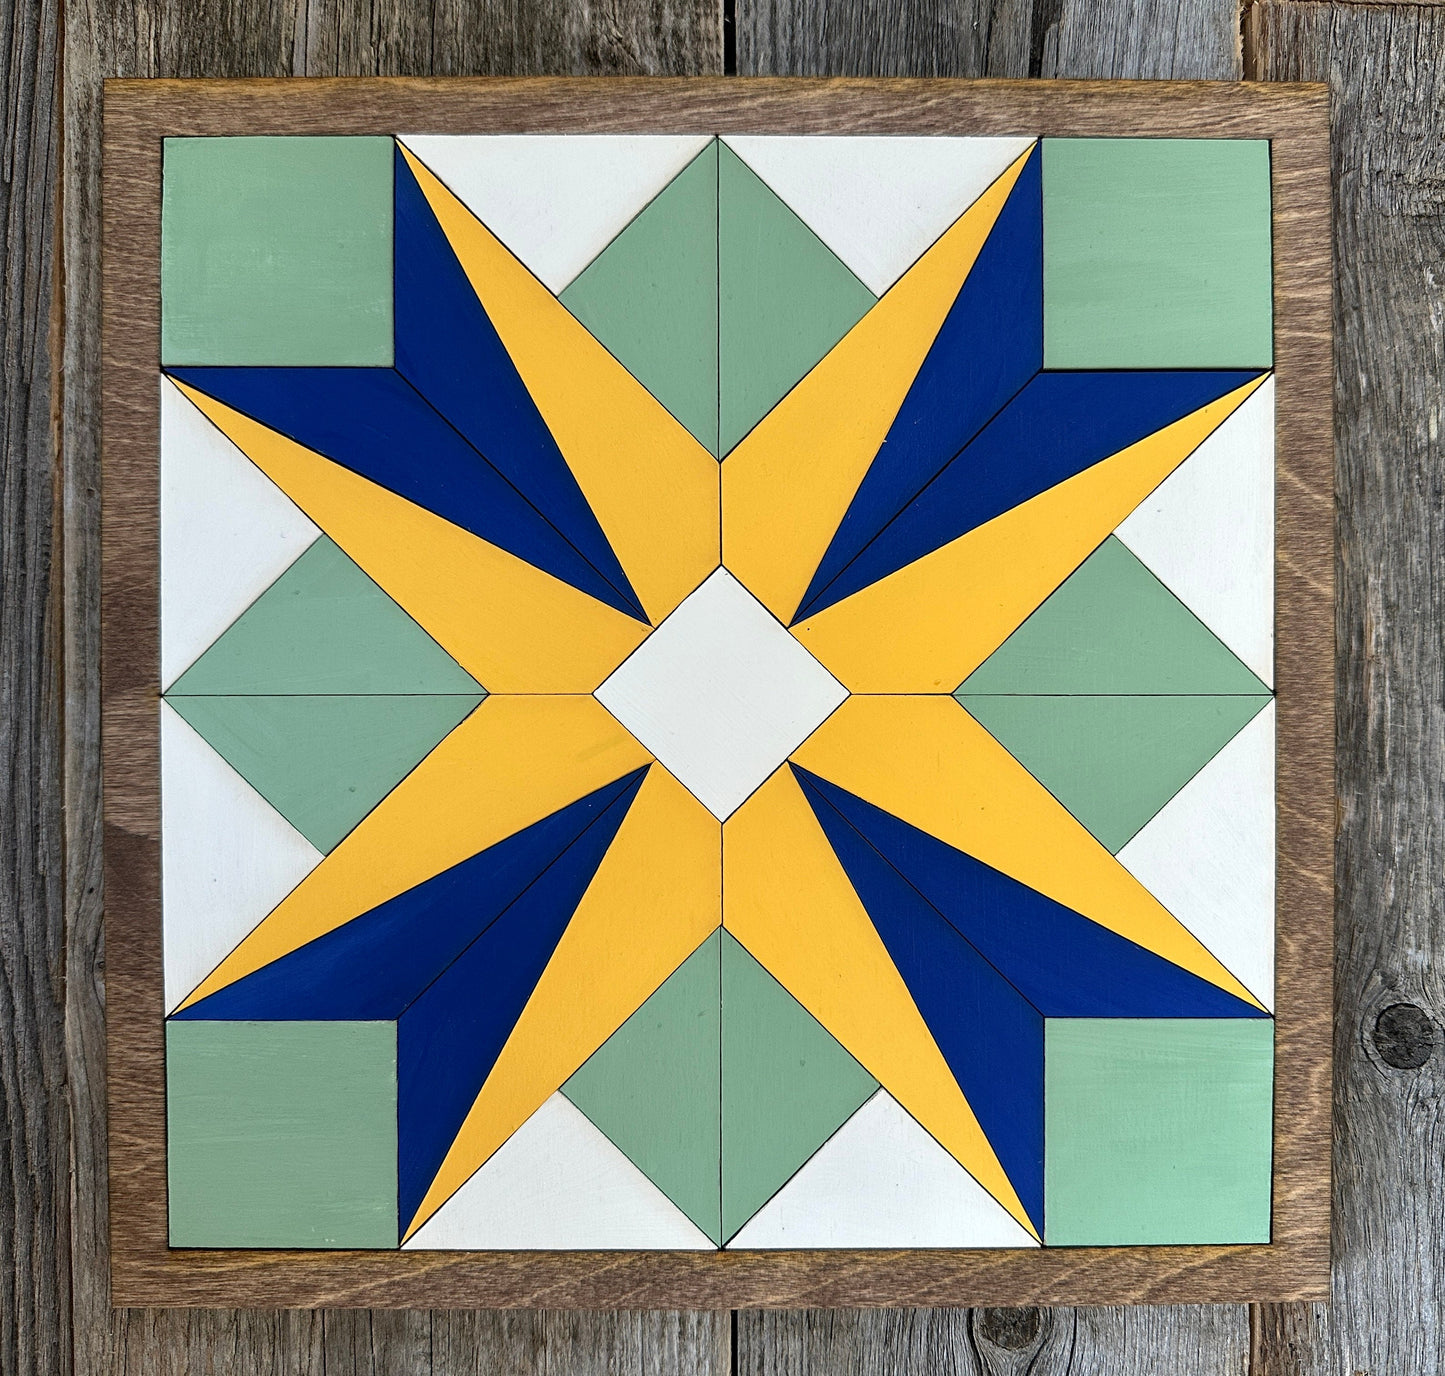 DIY Barn Quilt Mosaic Paint at home Painting Party Craft Kit, DIY Mosaic Barn Quilt, Gift for Her or Him, Crafts for Adults, DIY for Teens